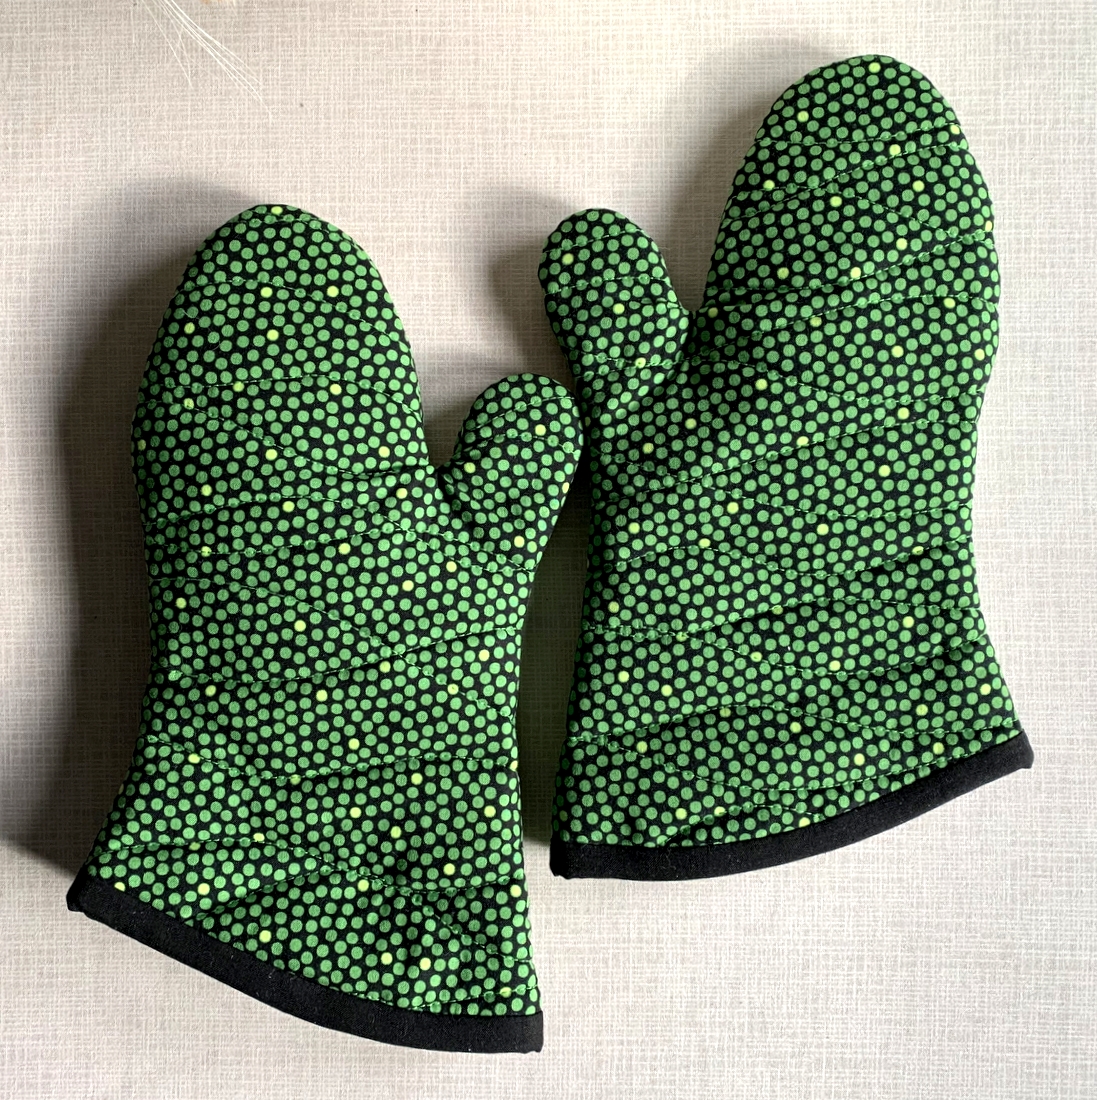 Avocado & Green Oven Mitts Set: Double Oven Gloves and Pot Holder 